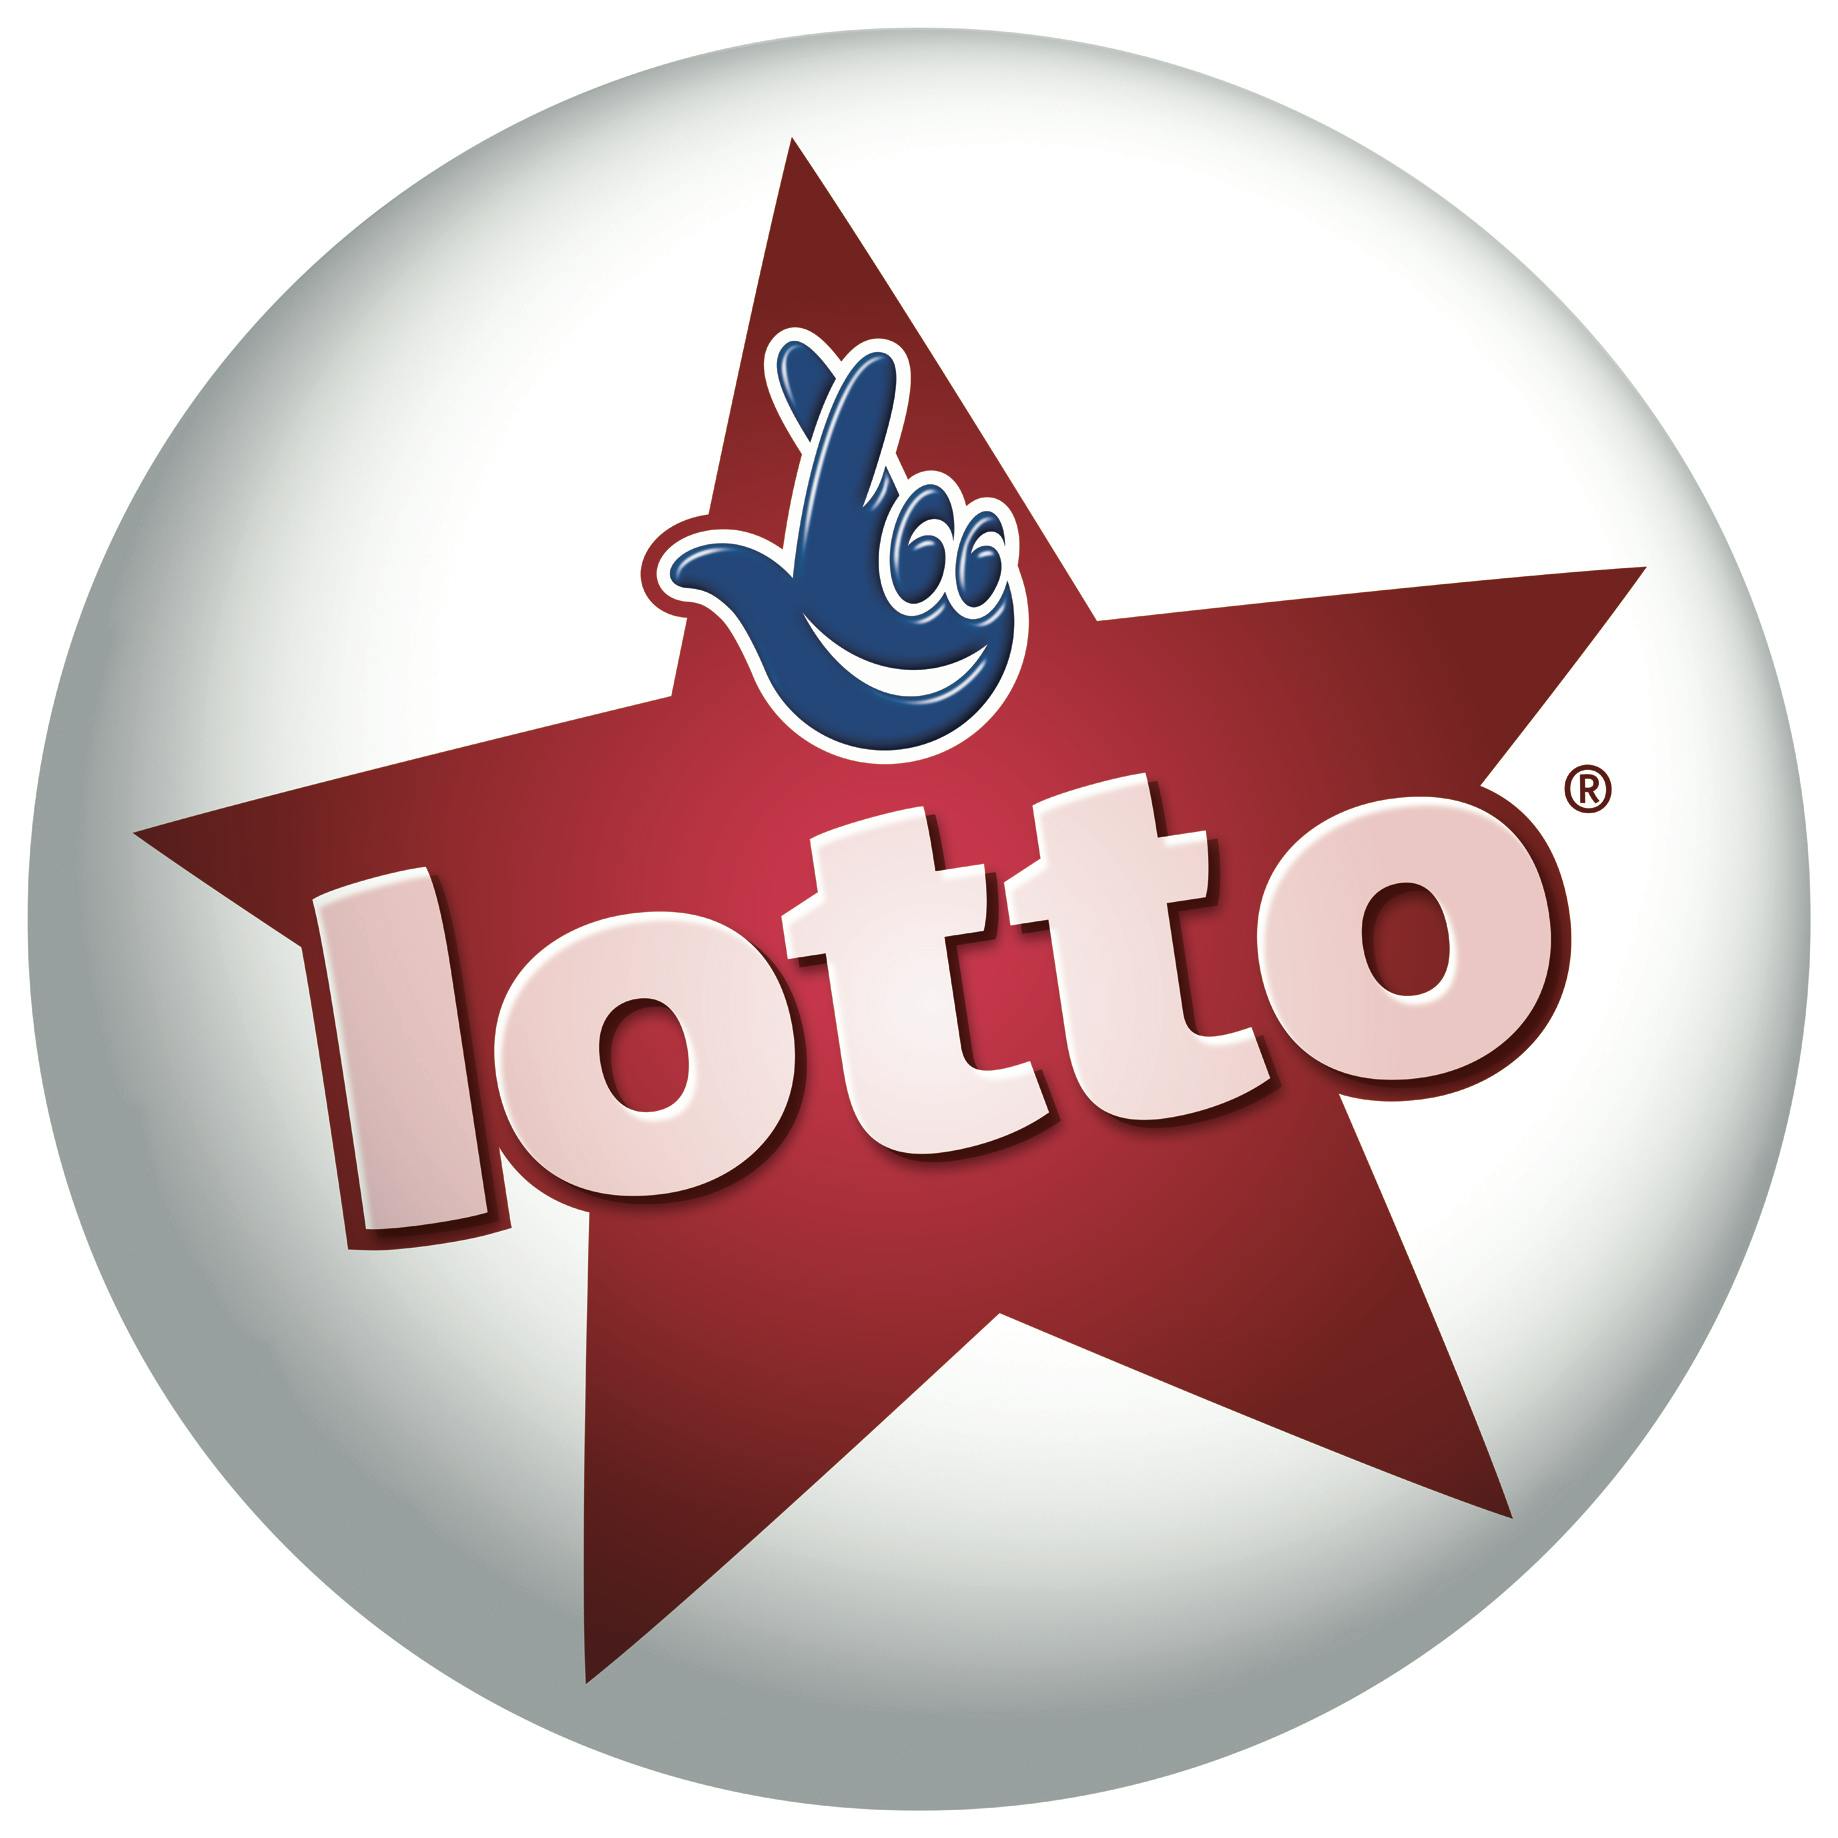 lotto result march 2 2018